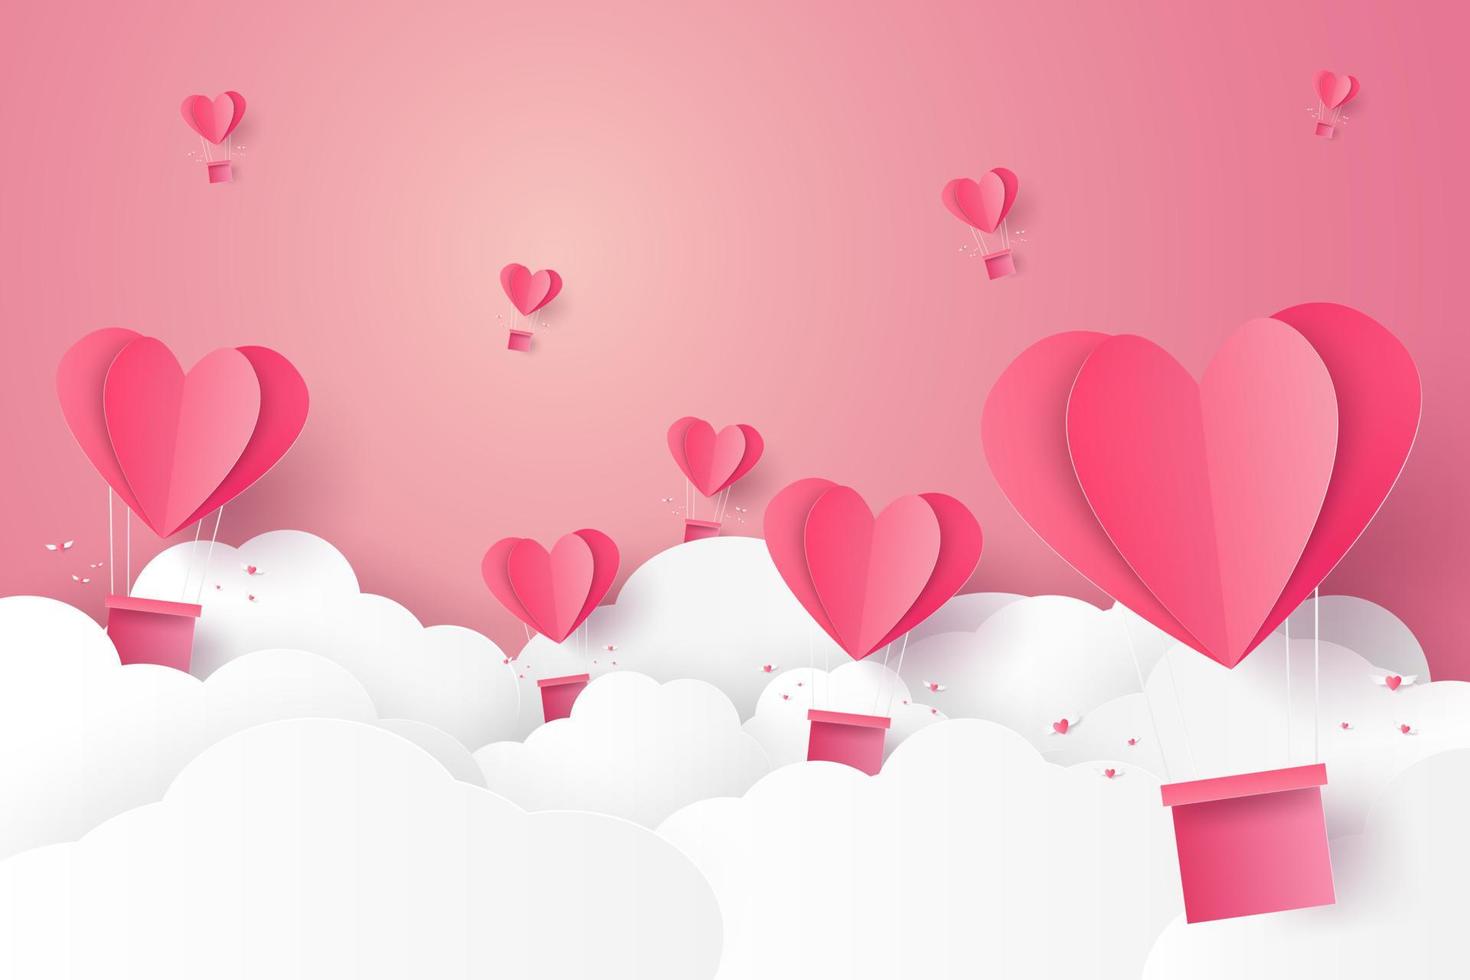 Valentines day , Illustration of love , Hot air balloon in a heart shape flying on sky , paper art style vector